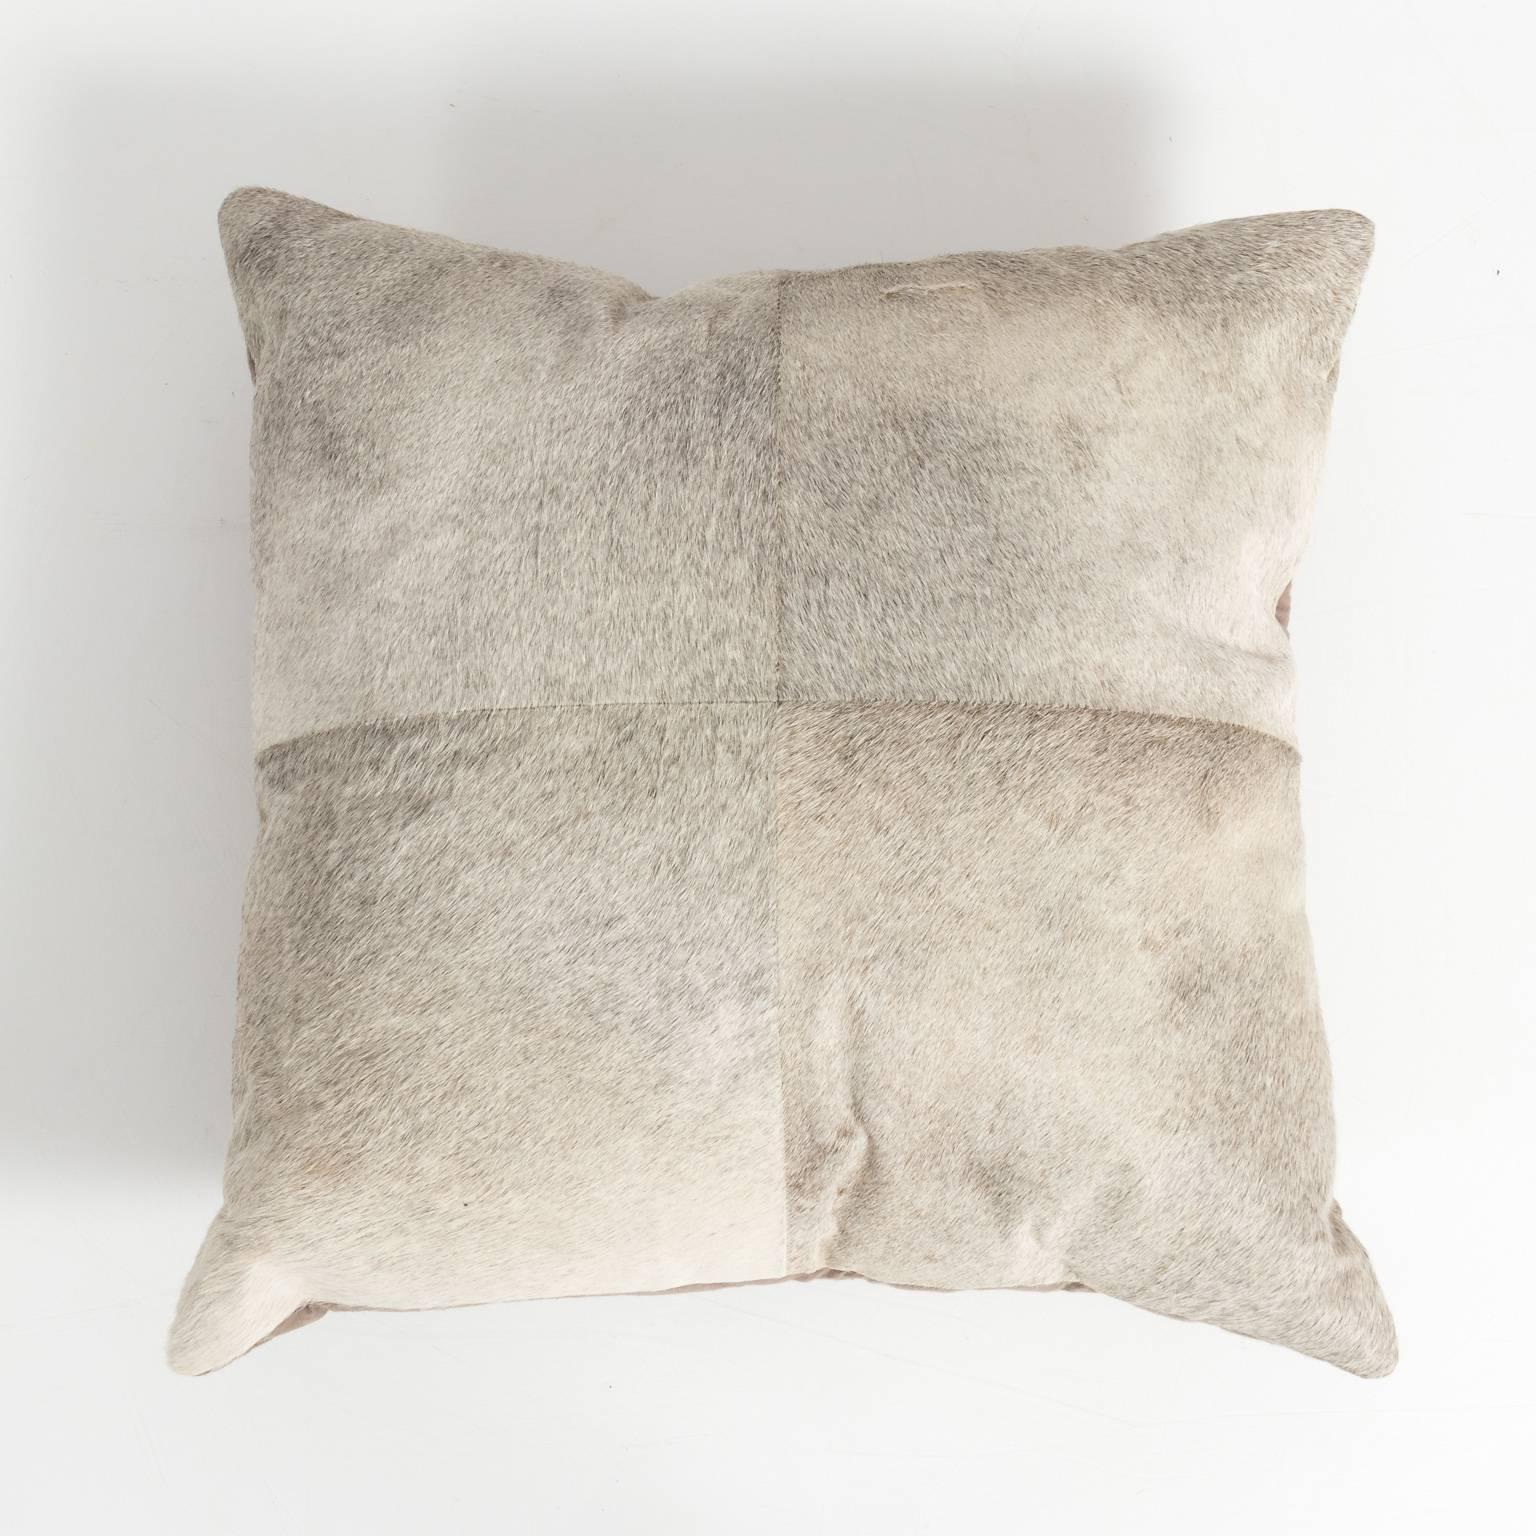 Pair of pony hair pillows in shades of gray, with feather and down inserts.
 